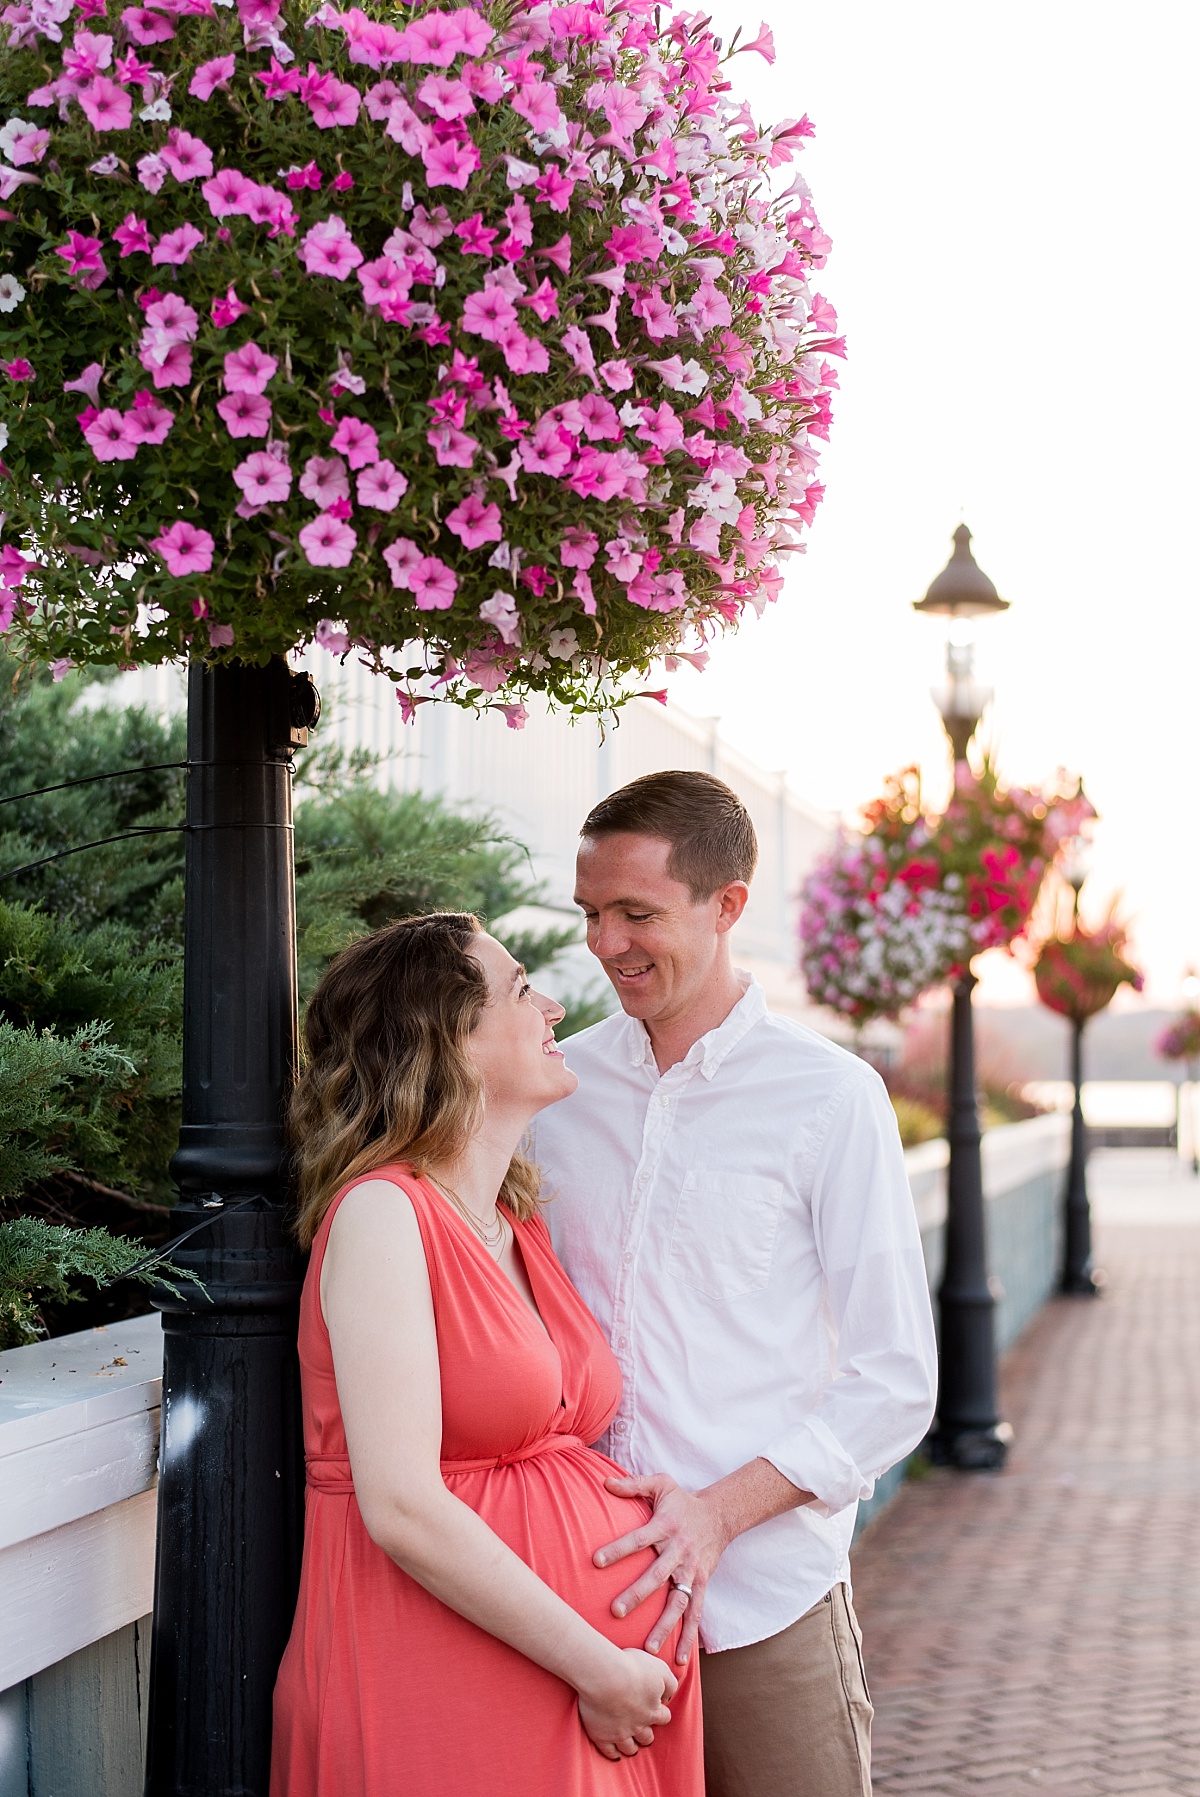 Alexandria Waterfront Maternity Session in Old Town Alexandria, VA by Erin Tetterton Photography